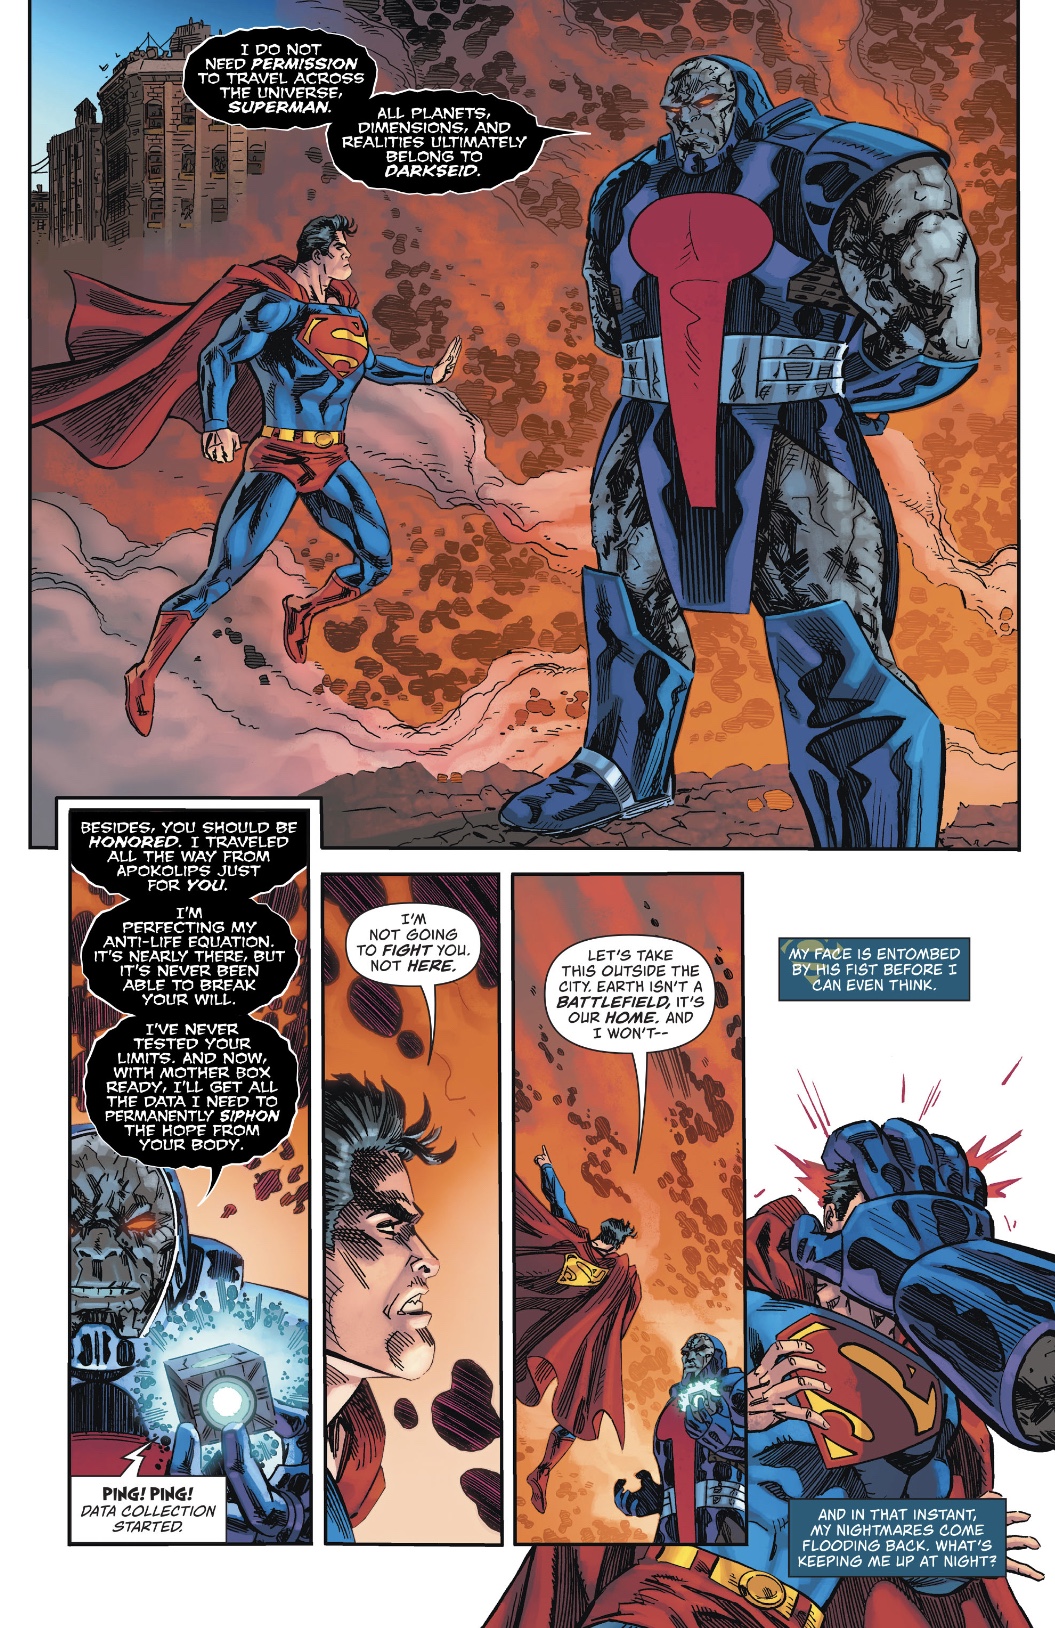 Supergirl Comic Box Commentary: Review: The Man Of Steel #2